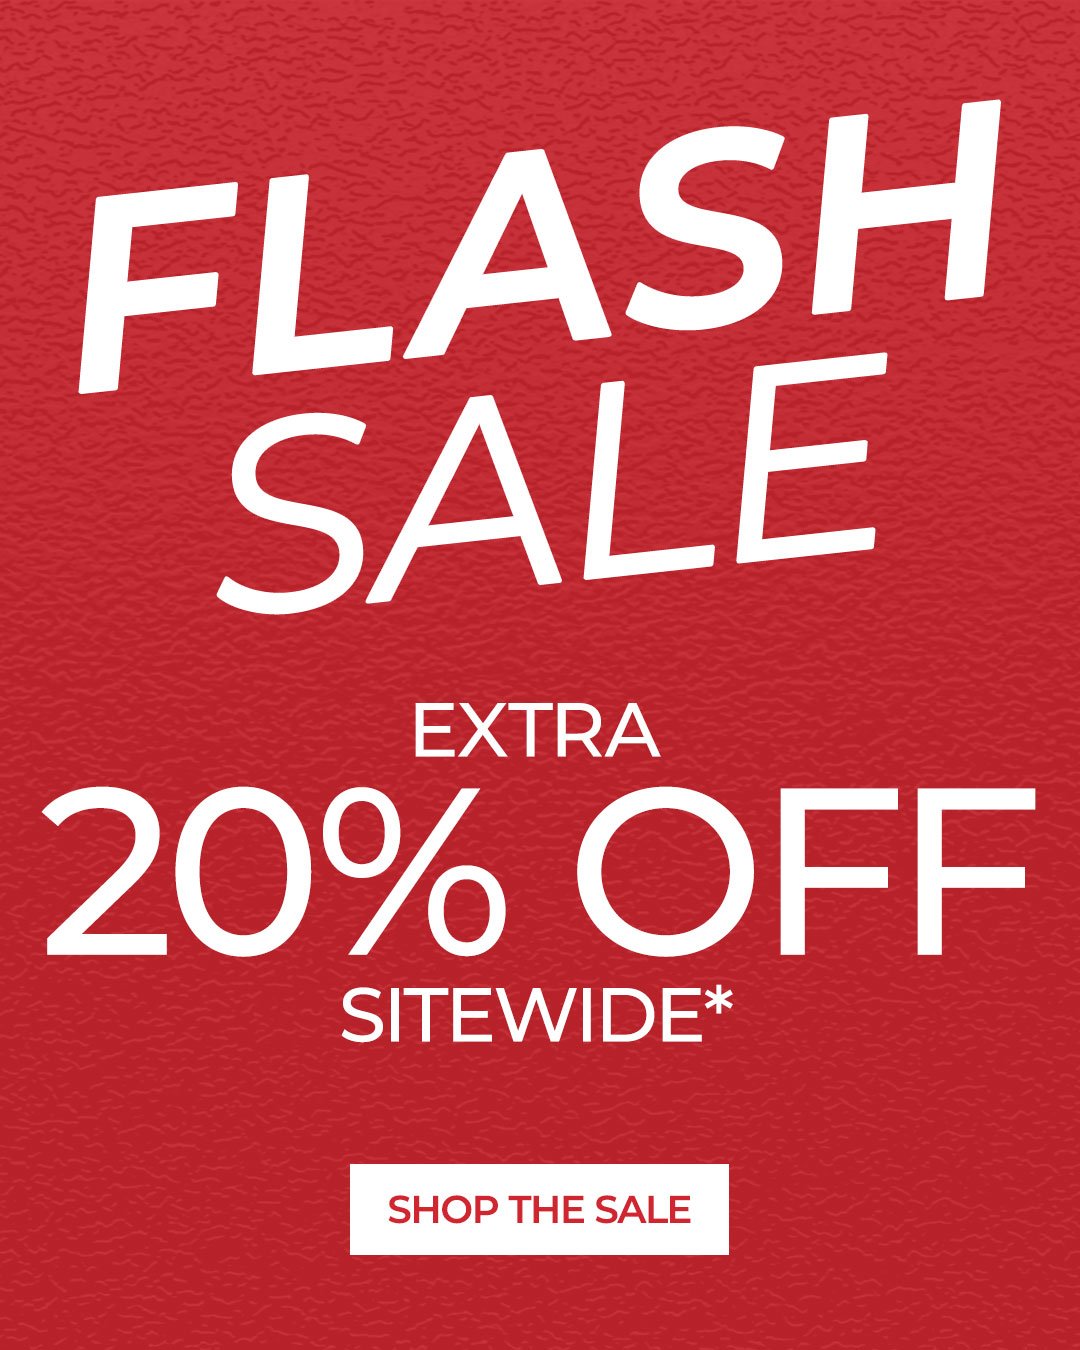 Flash Sales Extra 20% off Sitewide